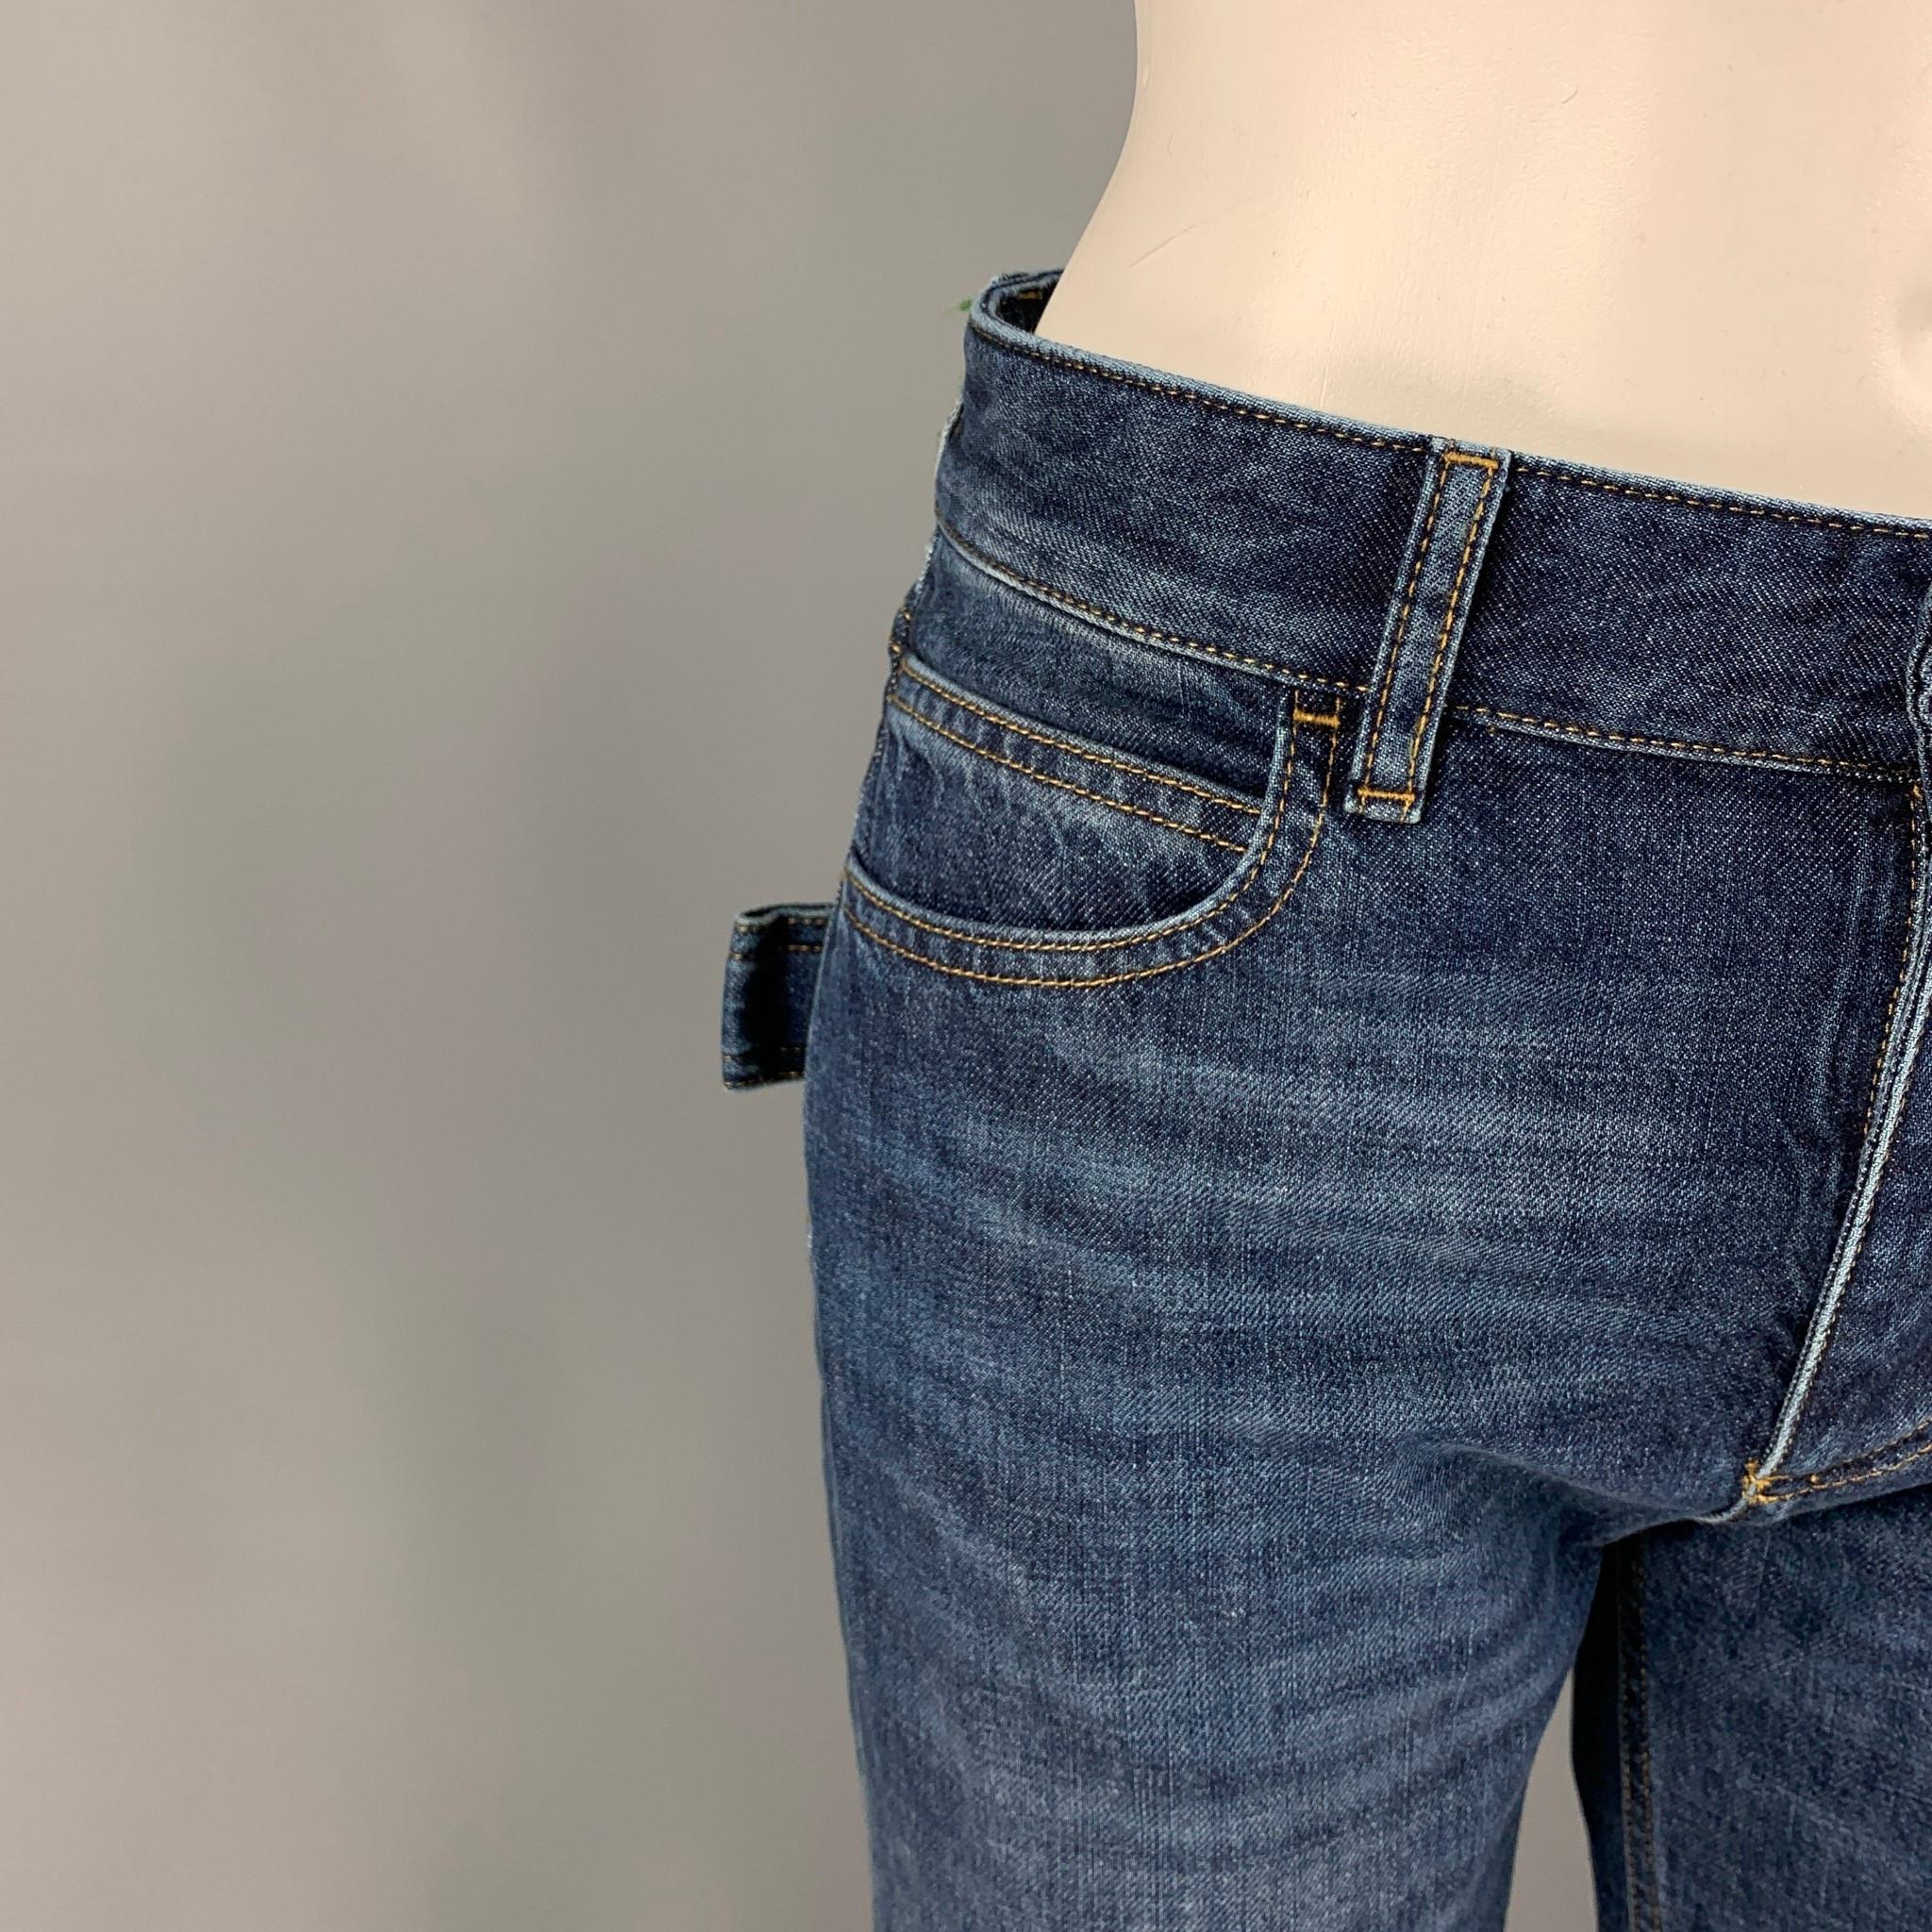 BOTTEGA VENETA jeans comes in a blue washed cotton featuring a mid-rise waist, flared leg design, contrast stitching, green trim, and a button fly closure. Made in Italy. 

Excellent Pre-Owned Condition.
Marked: 36
Original Retail Price: